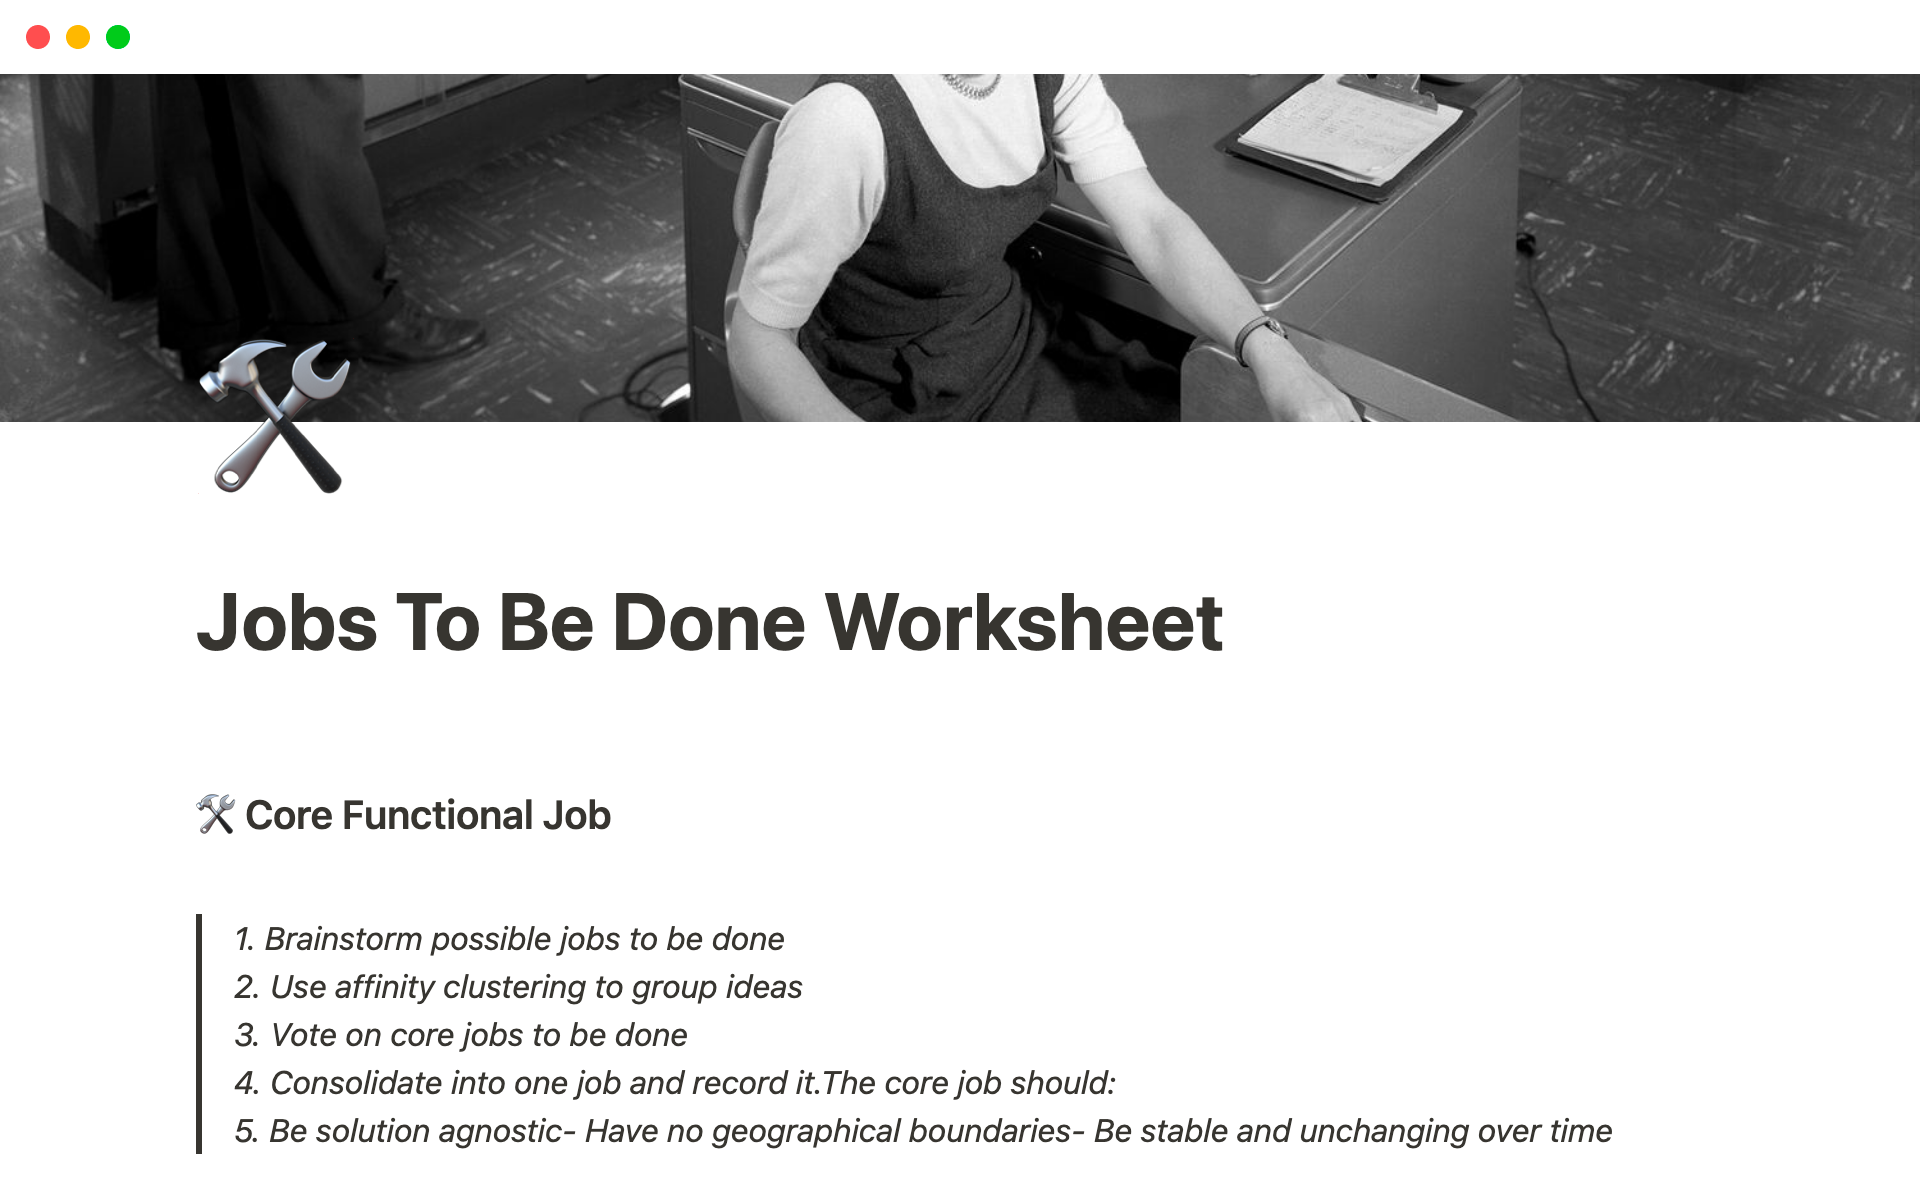 The Jobs-to-be-Done (JTBD) framework is a product and marketing strategy framework that seeks to understand the motivations and needs of customers beyond just the product itself.